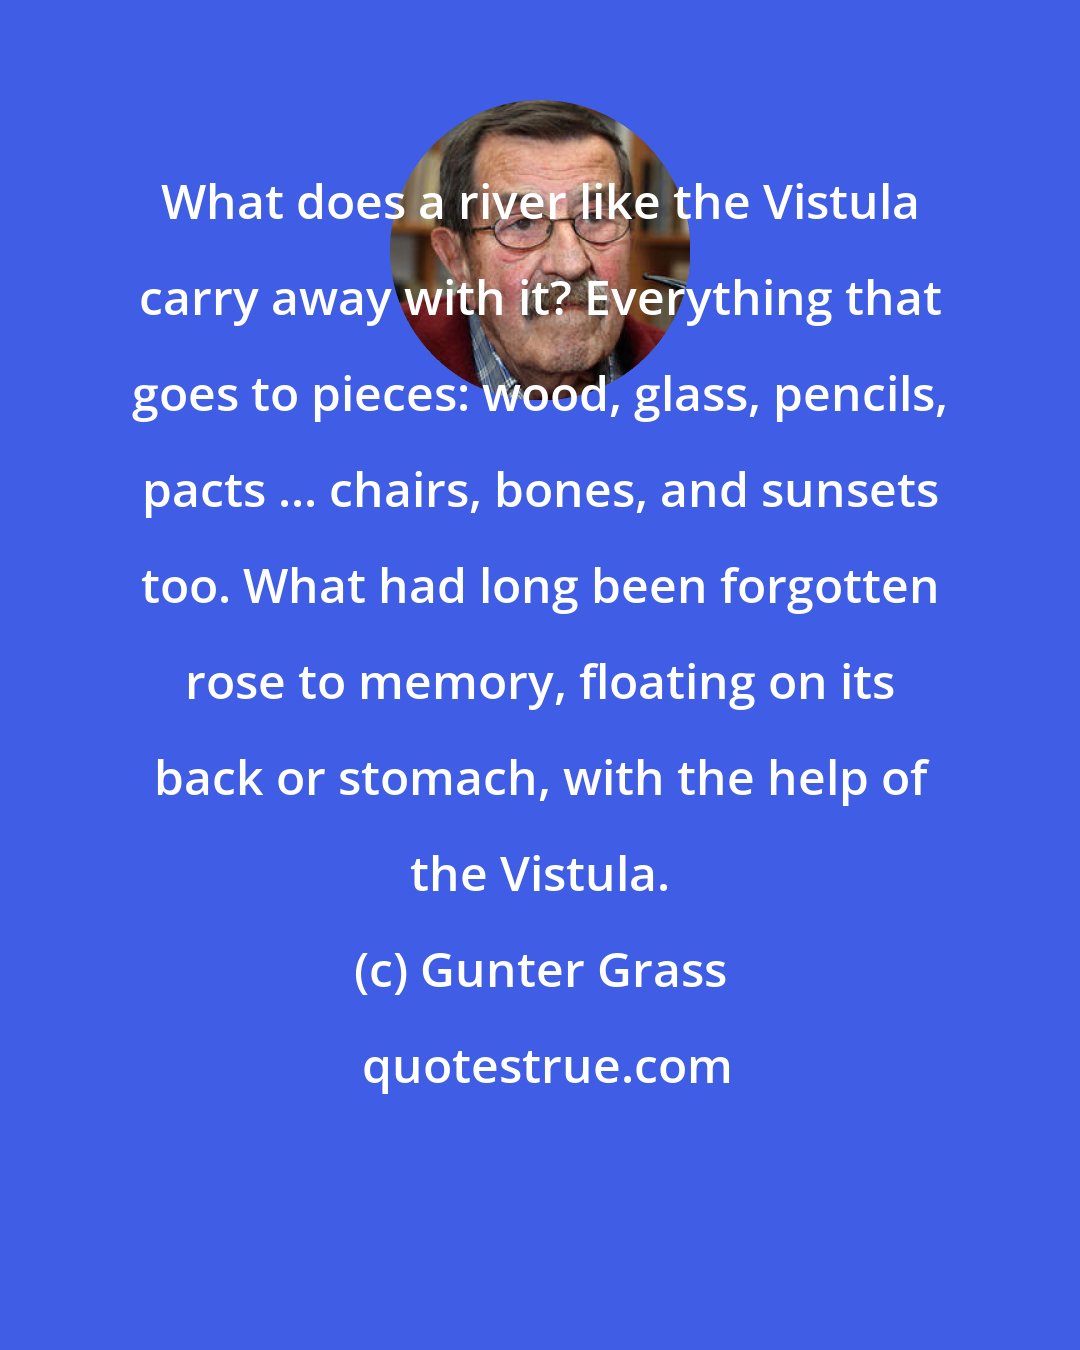 Gunter Grass: What does a river like the Vistula carry away with it? Everything that goes to pieces: wood, glass, pencils, pacts ... chairs, bones, and sunsets too. What had long been forgotten rose to memory, floating on its back or stomach, with the help of the Vistula.